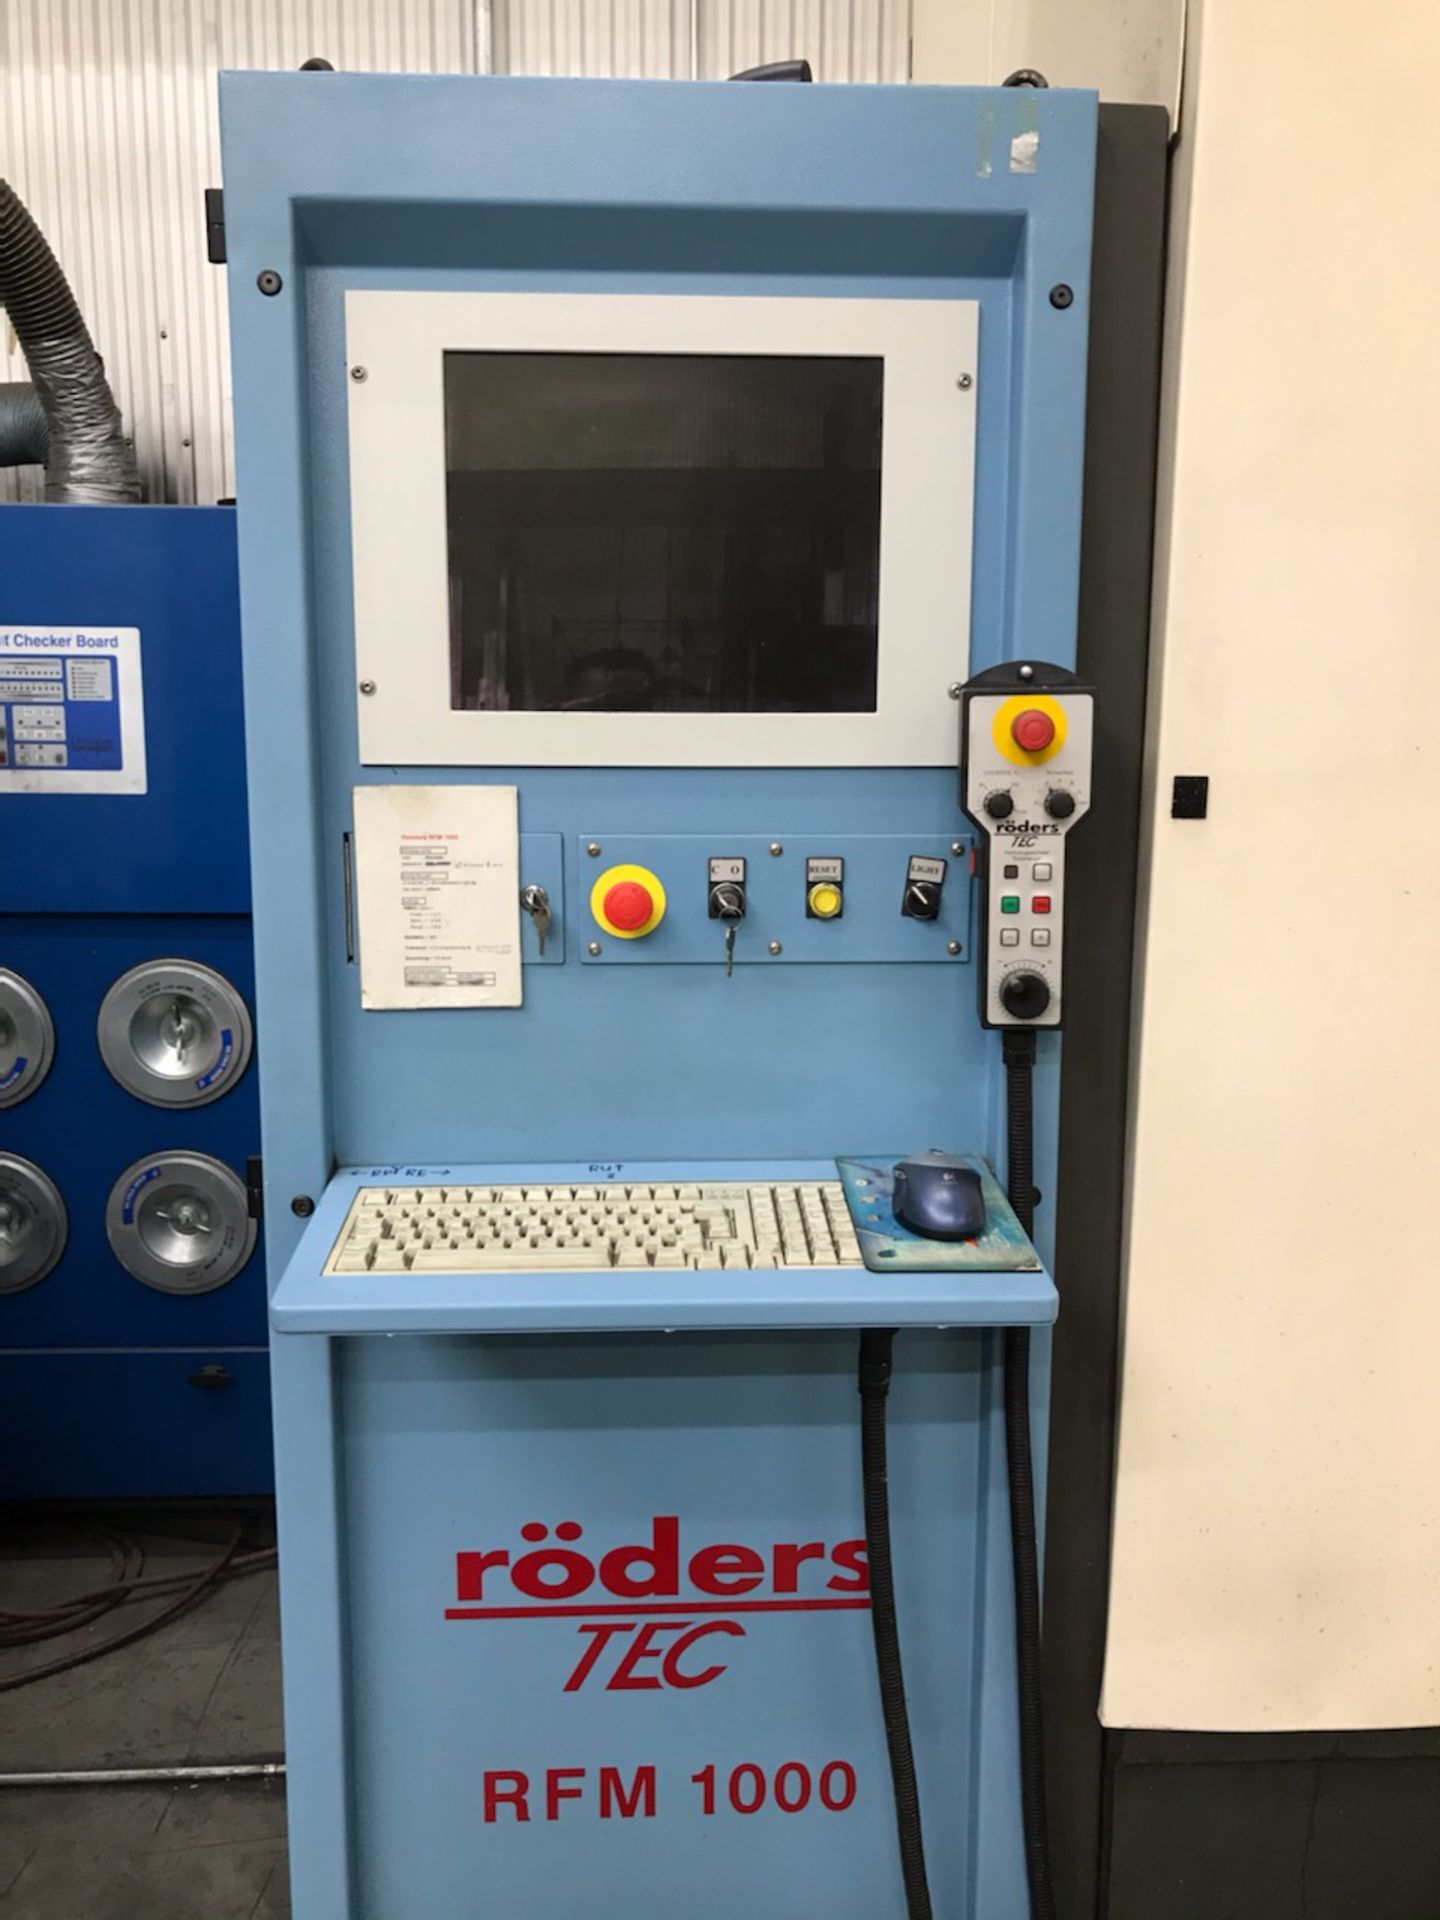 Roders RFM 1000 CNC 3-Axis Vertical Machining Center, New 2004 (see Notes) - Image 2 of 11